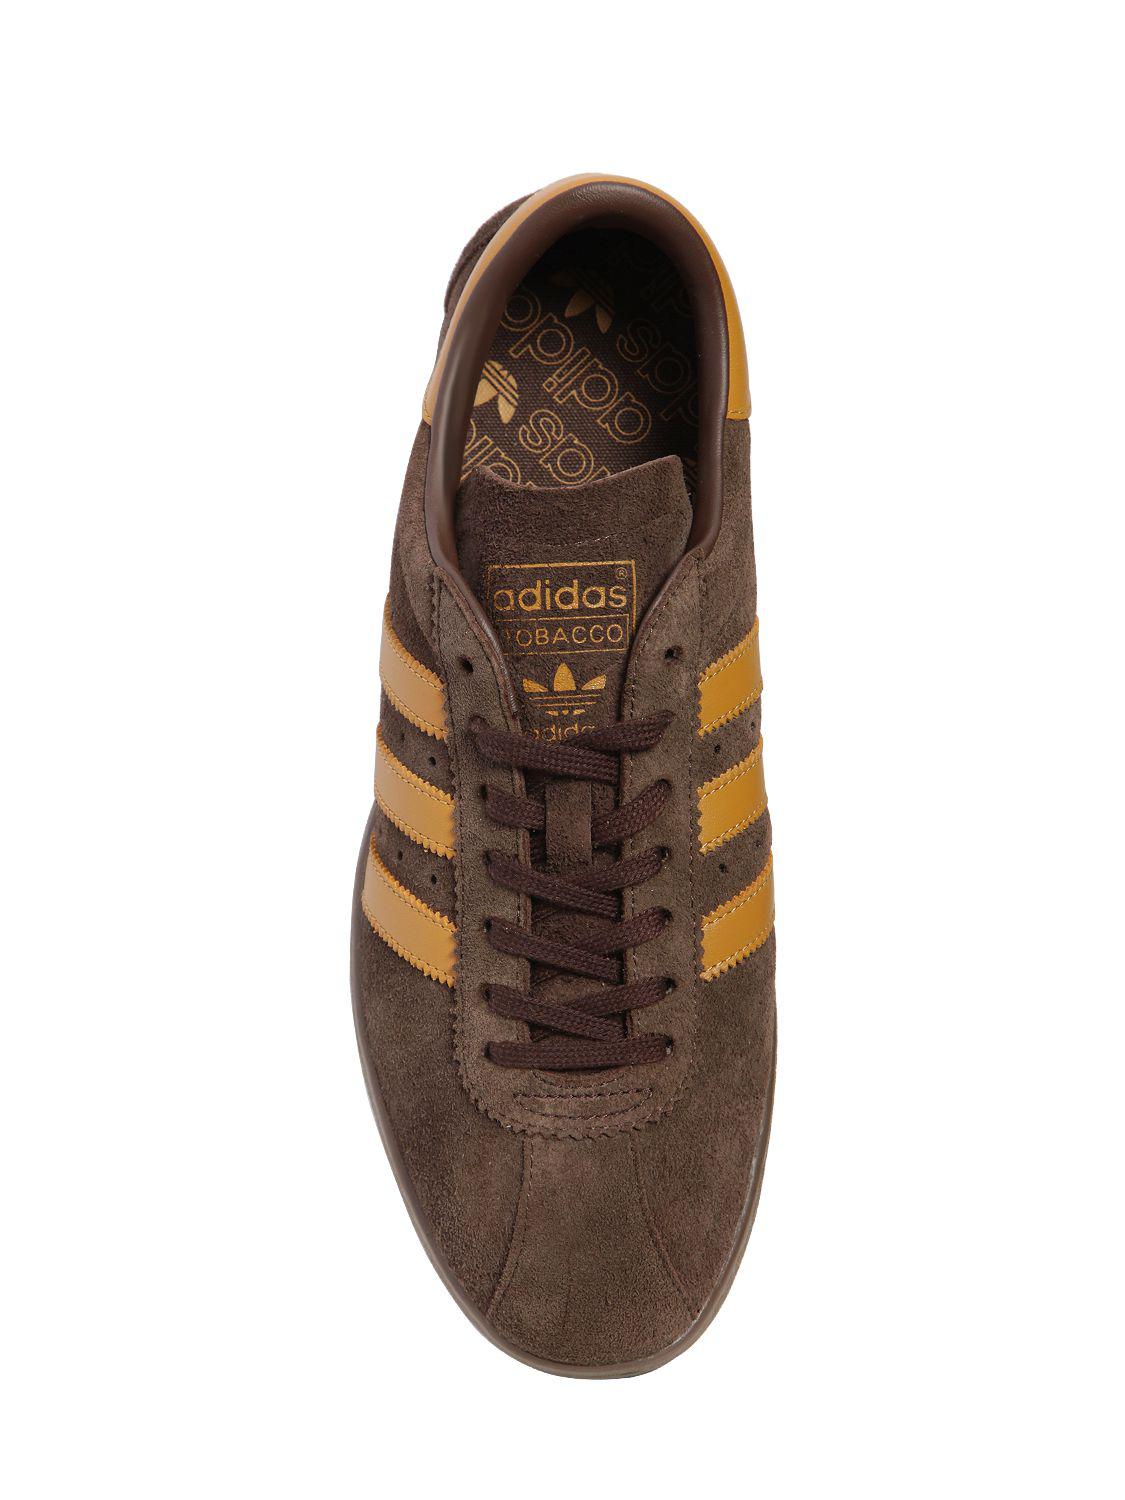 adidas Originals Tobacco Suede & Leather Sneakers in Brown for Men | Lyst UK